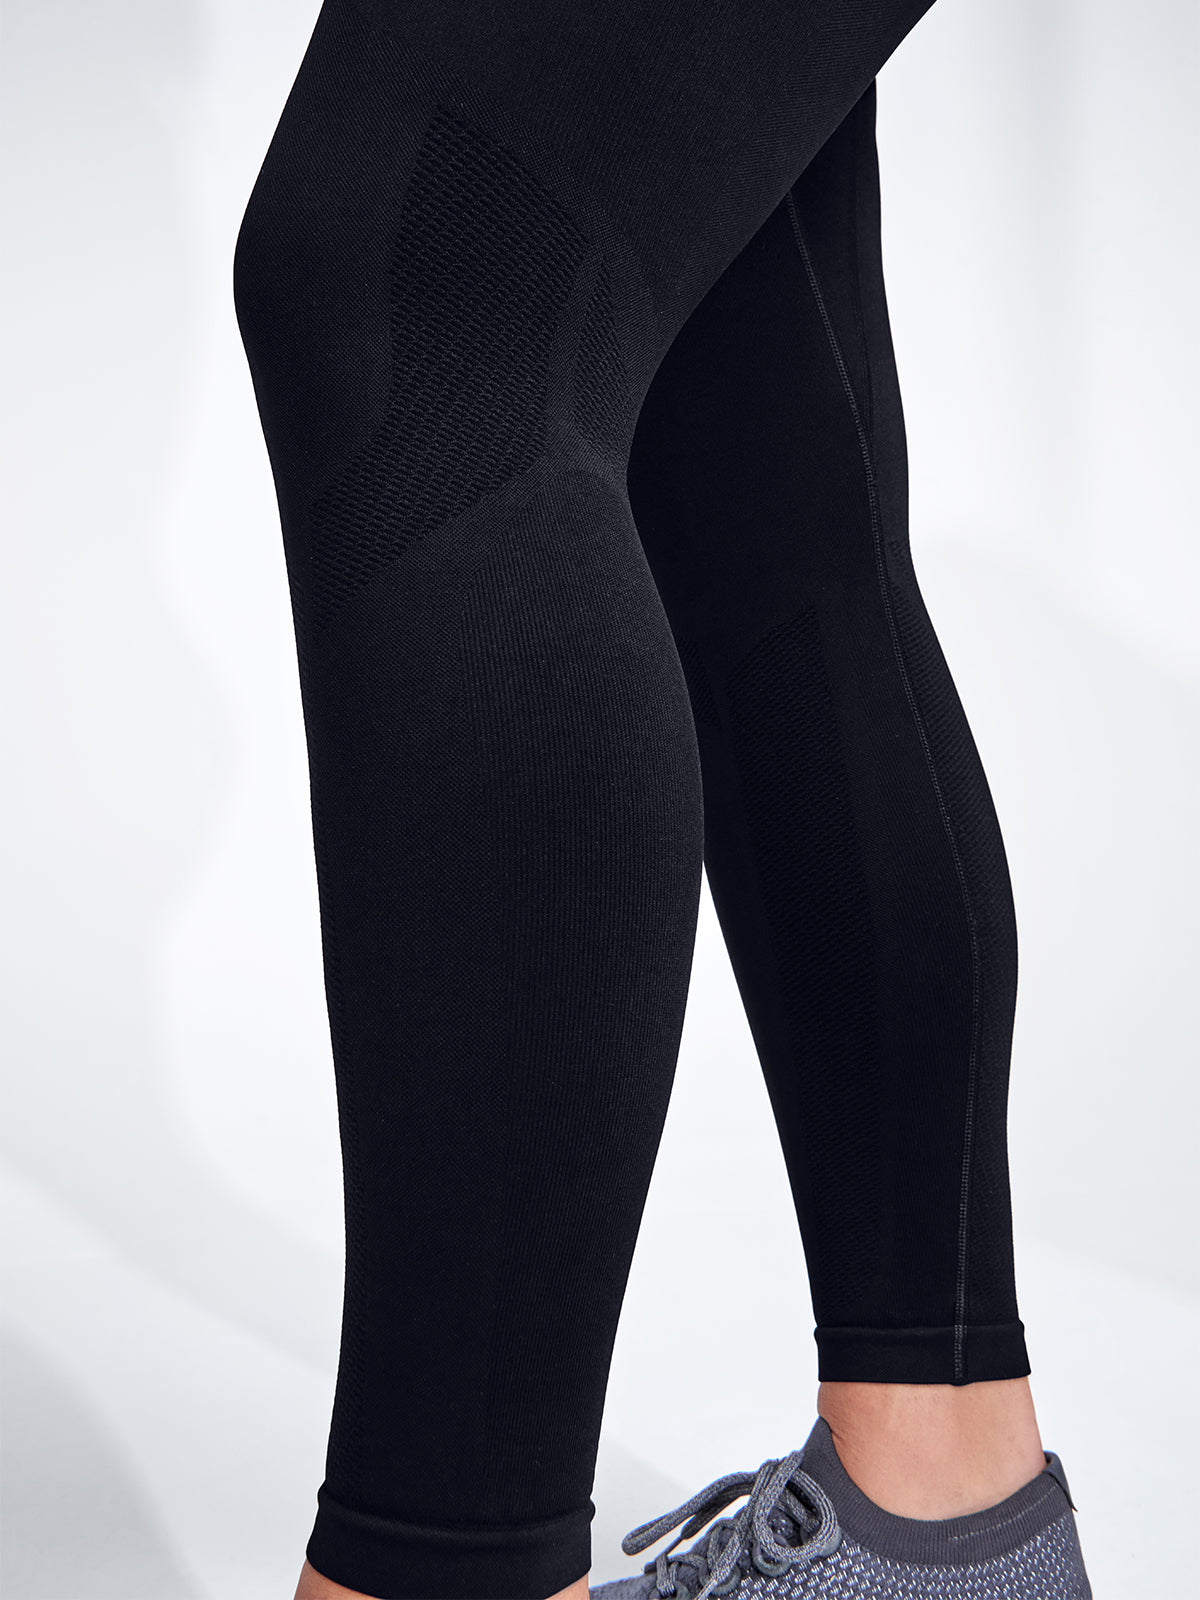 THE OUTER LIMITS 6/8 Legging Black